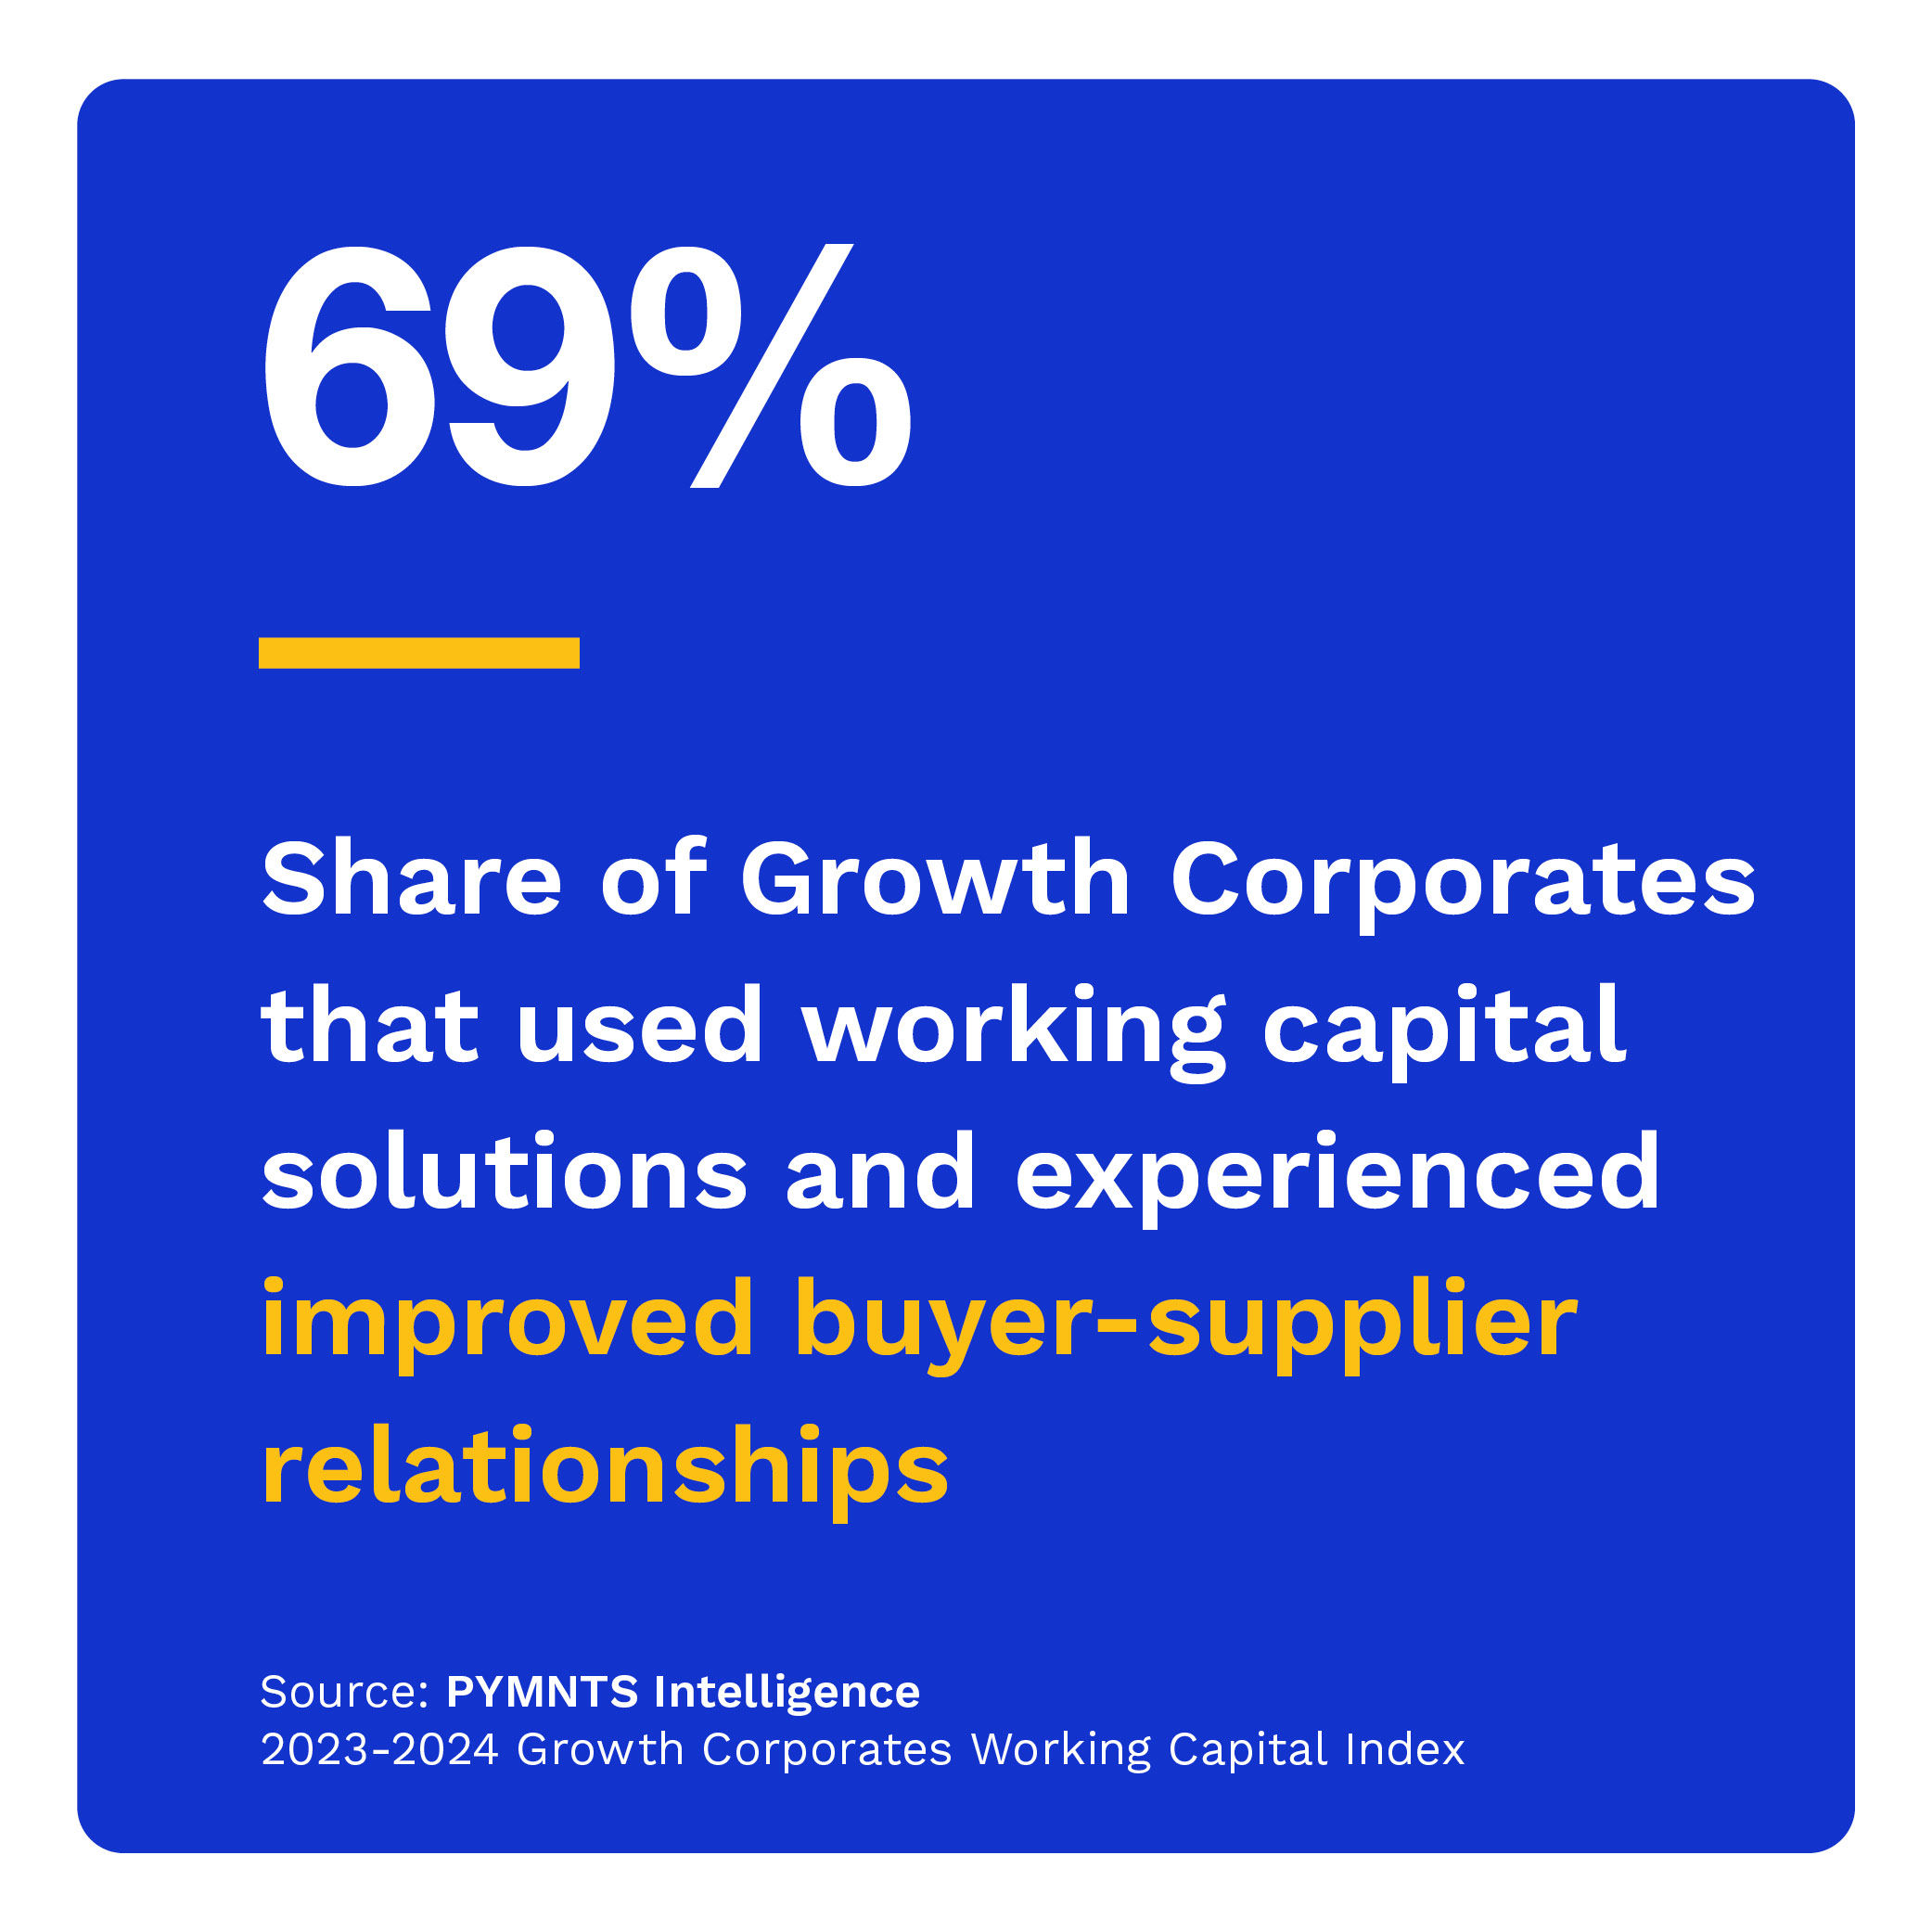 69%: Share of Growth Corporates that used working capital solutions and experienced improved buyer-supplier relationships